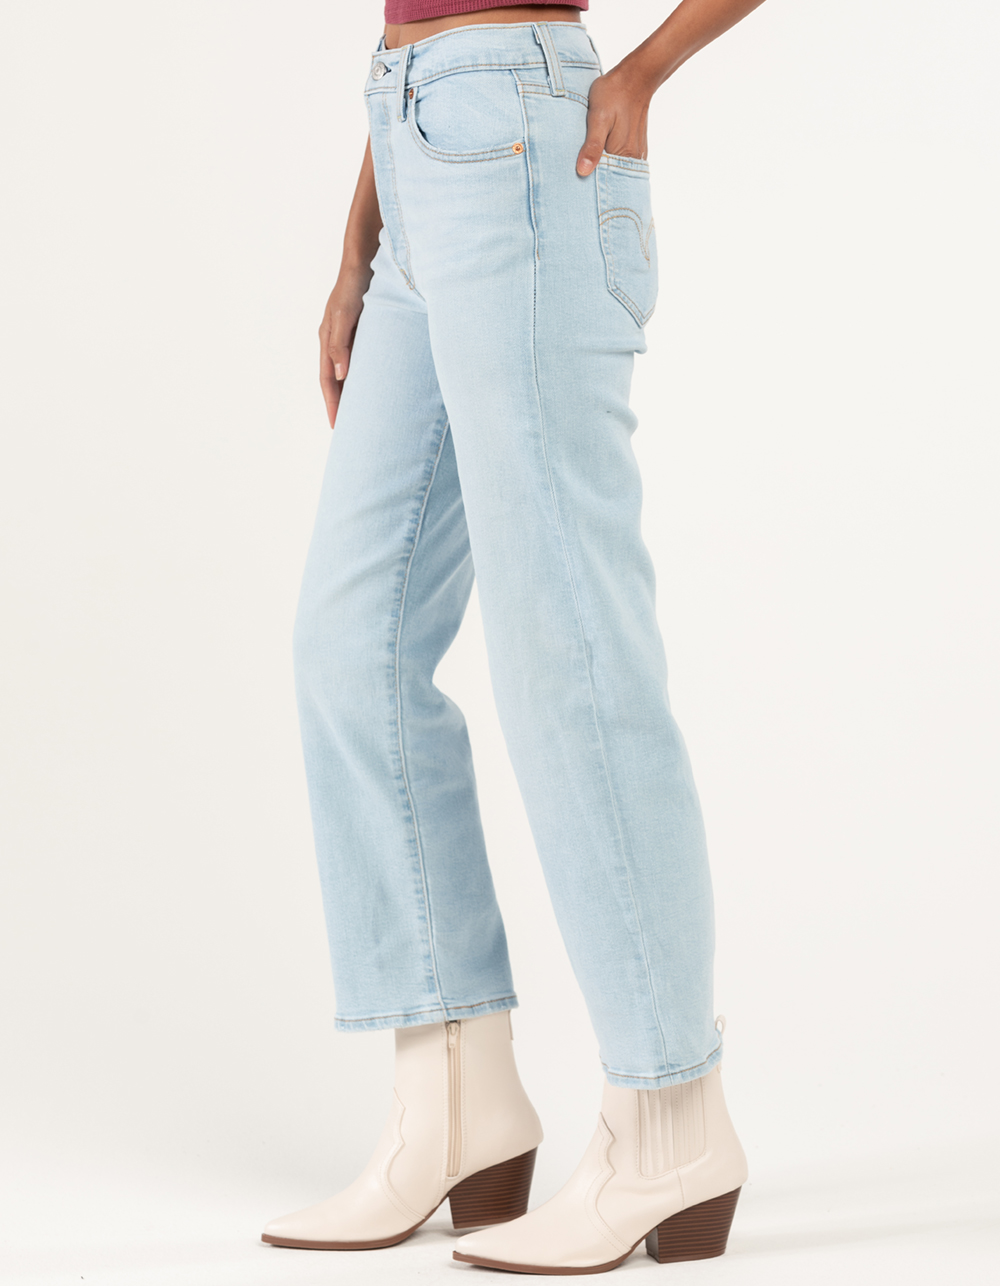 LEVI'S Womens Ribcage Straight Ankle Jeans - LIGHT WASH | Tillys